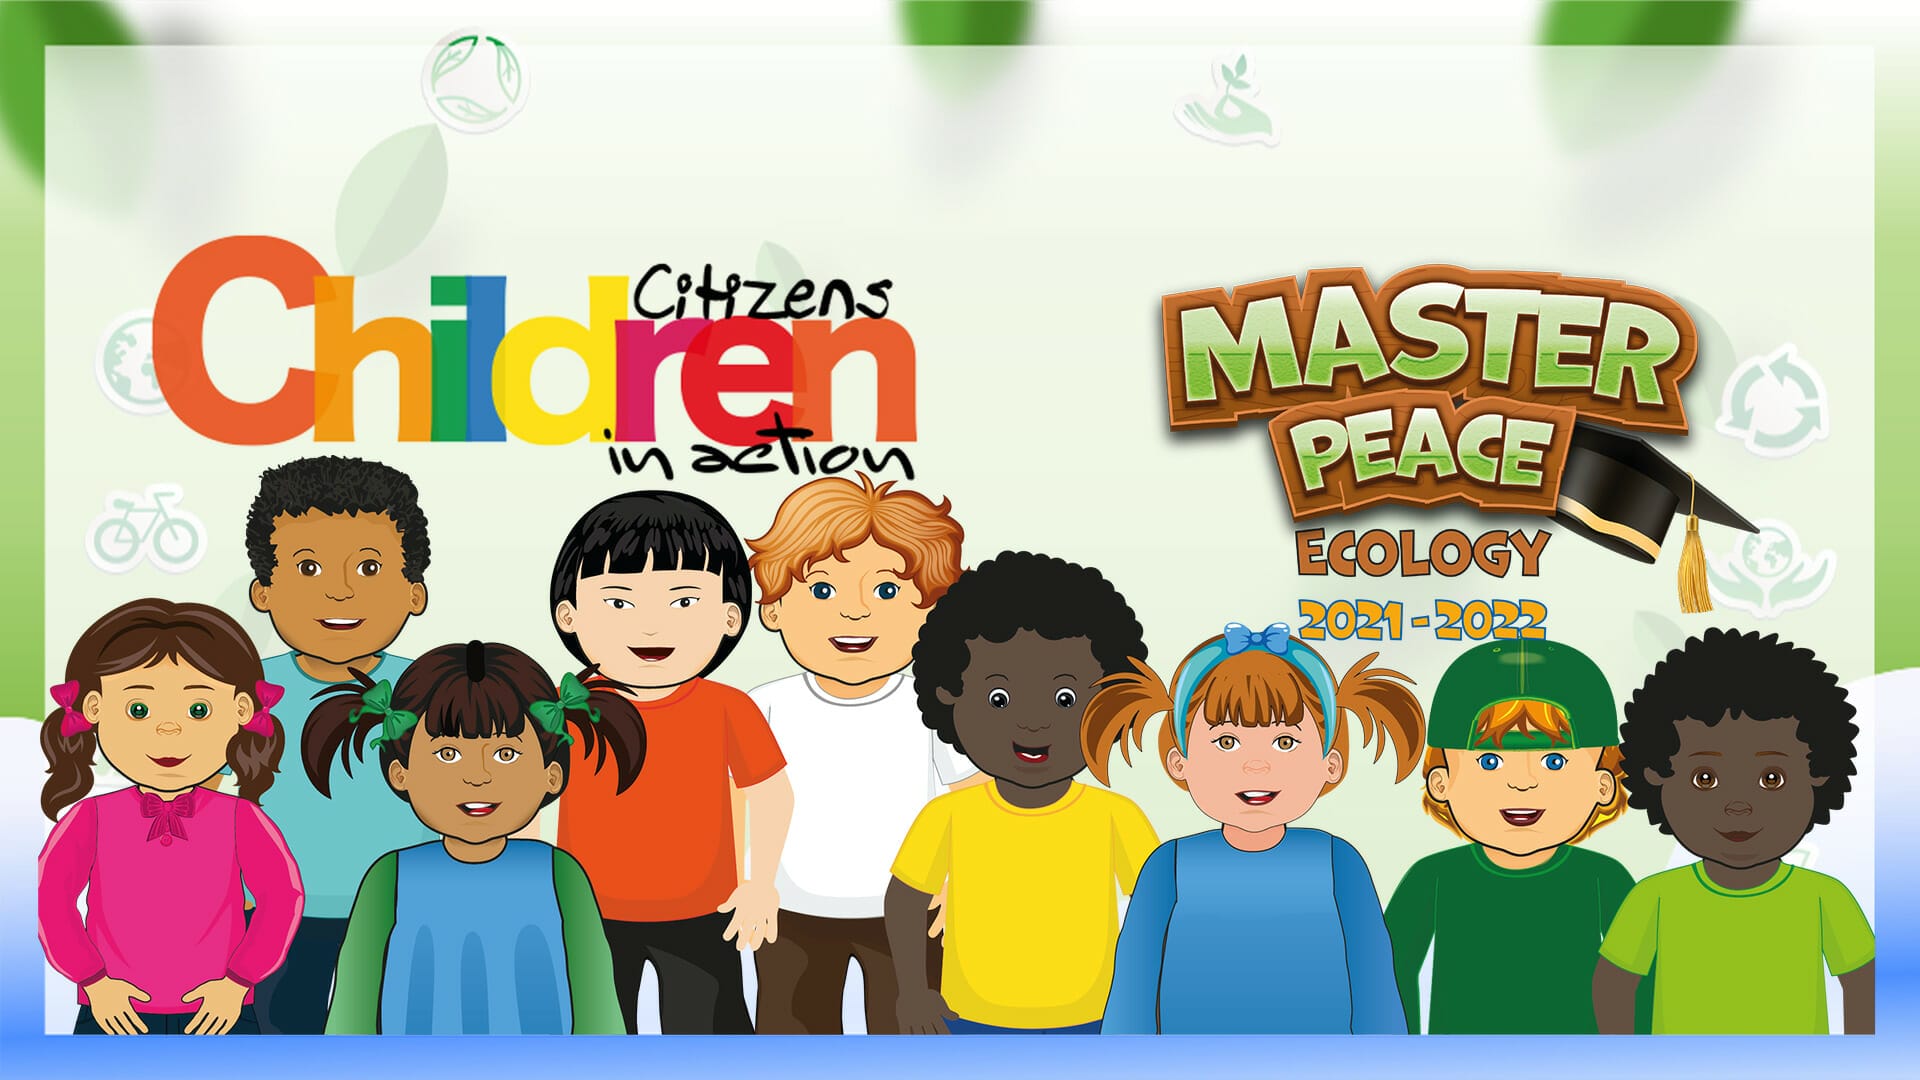 Master Peace Ecology [Children-citizens in action]